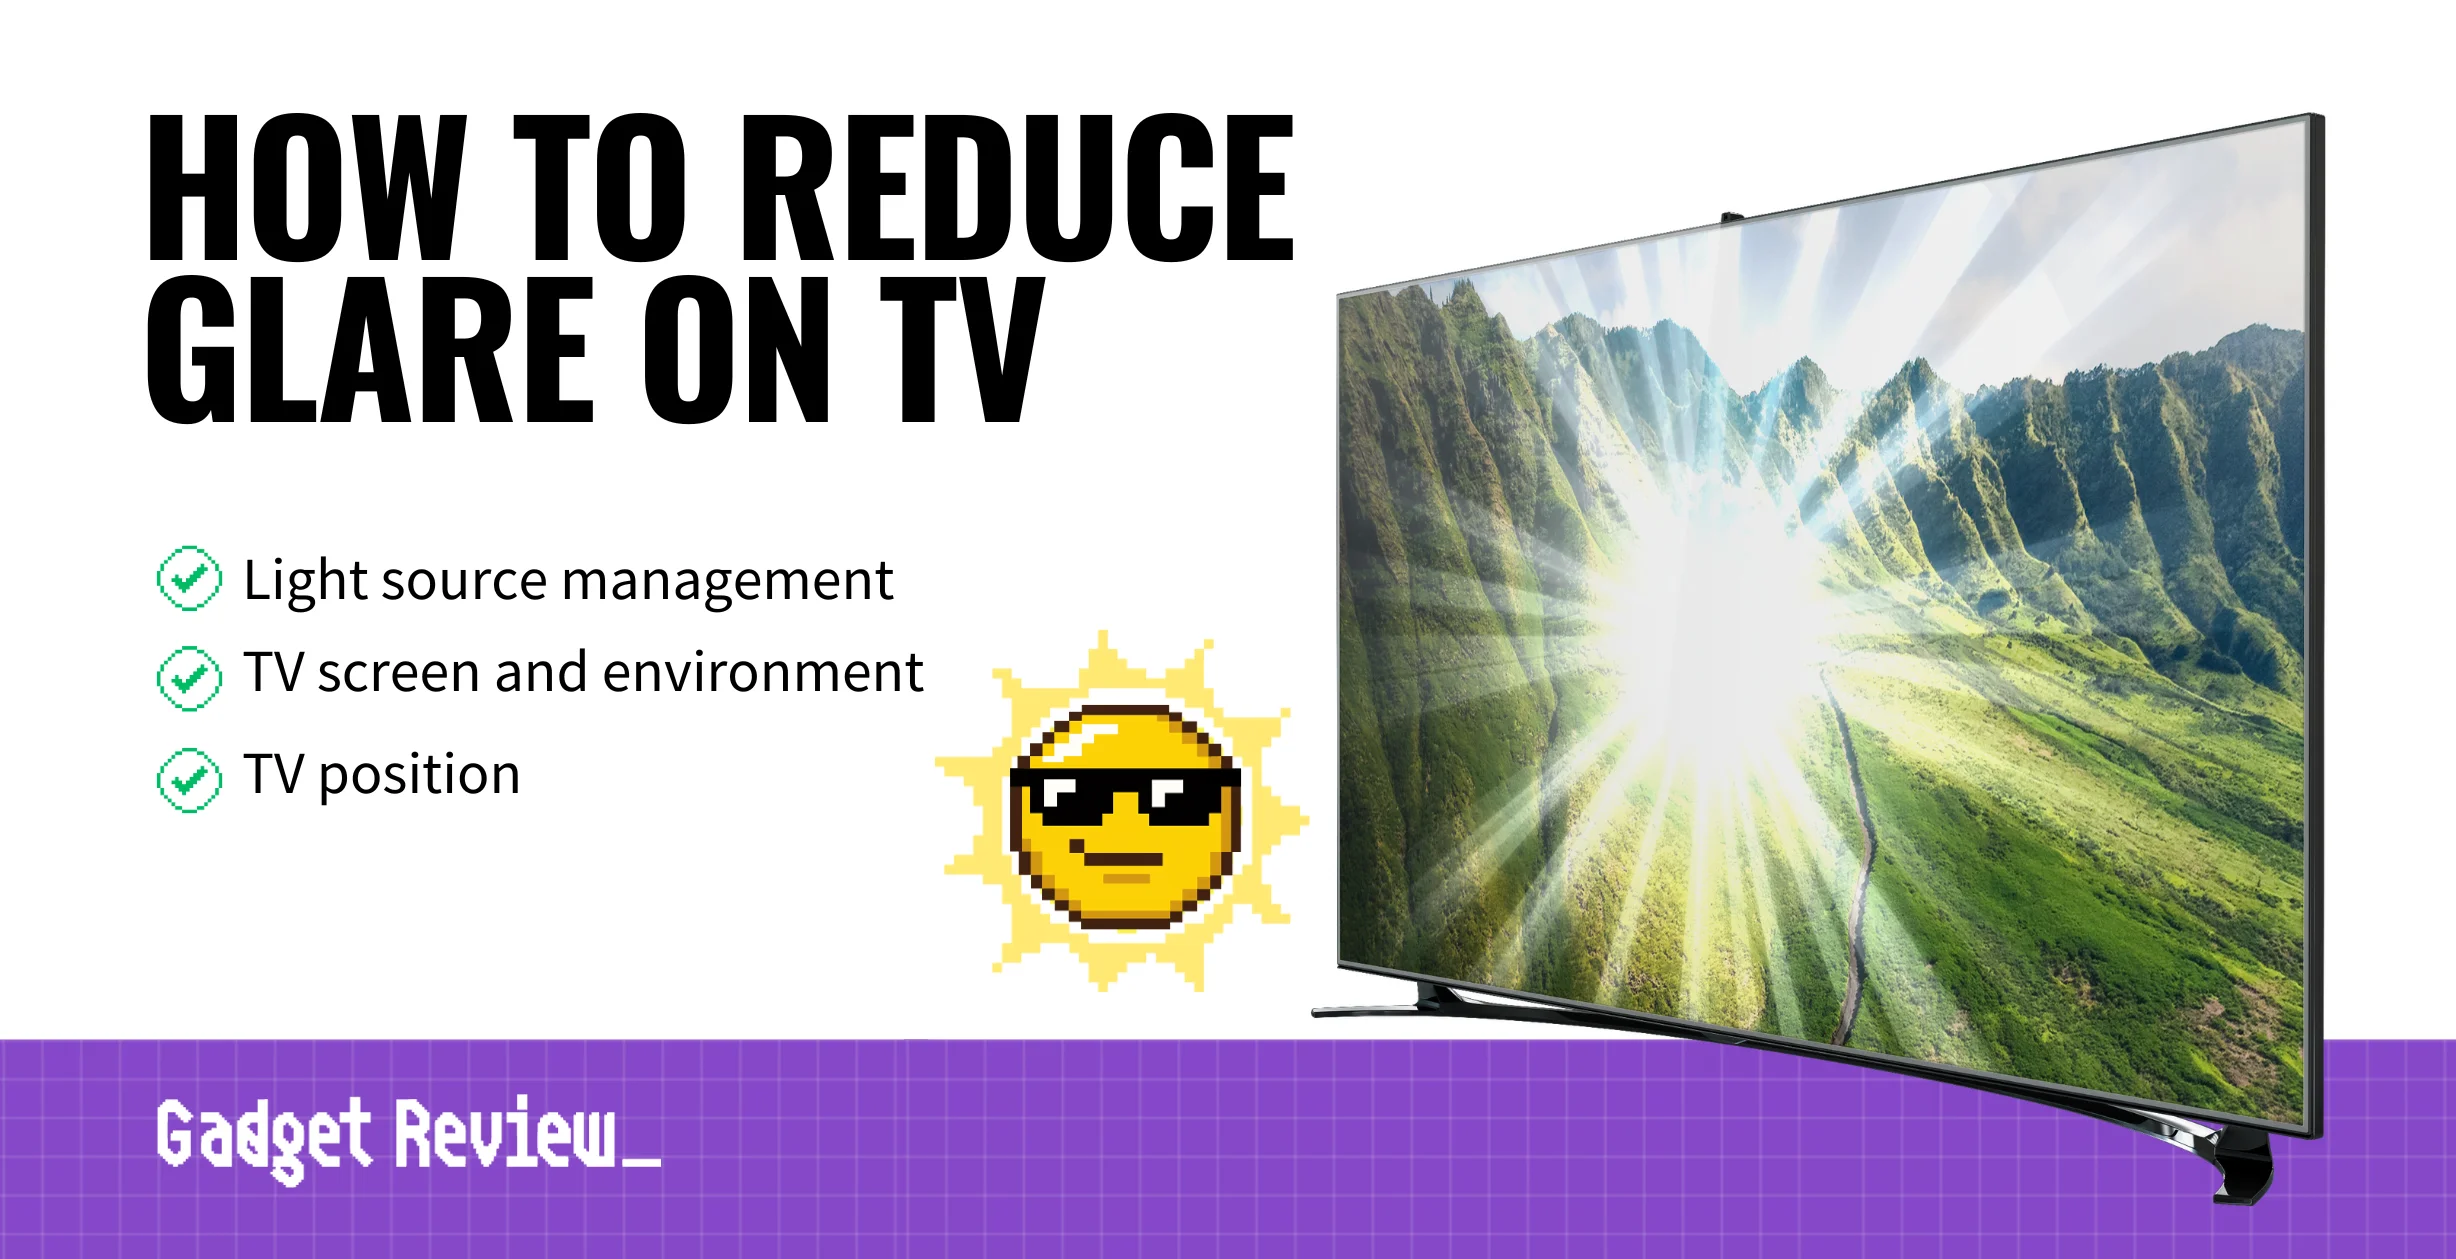 how to reduce glare on tv guide